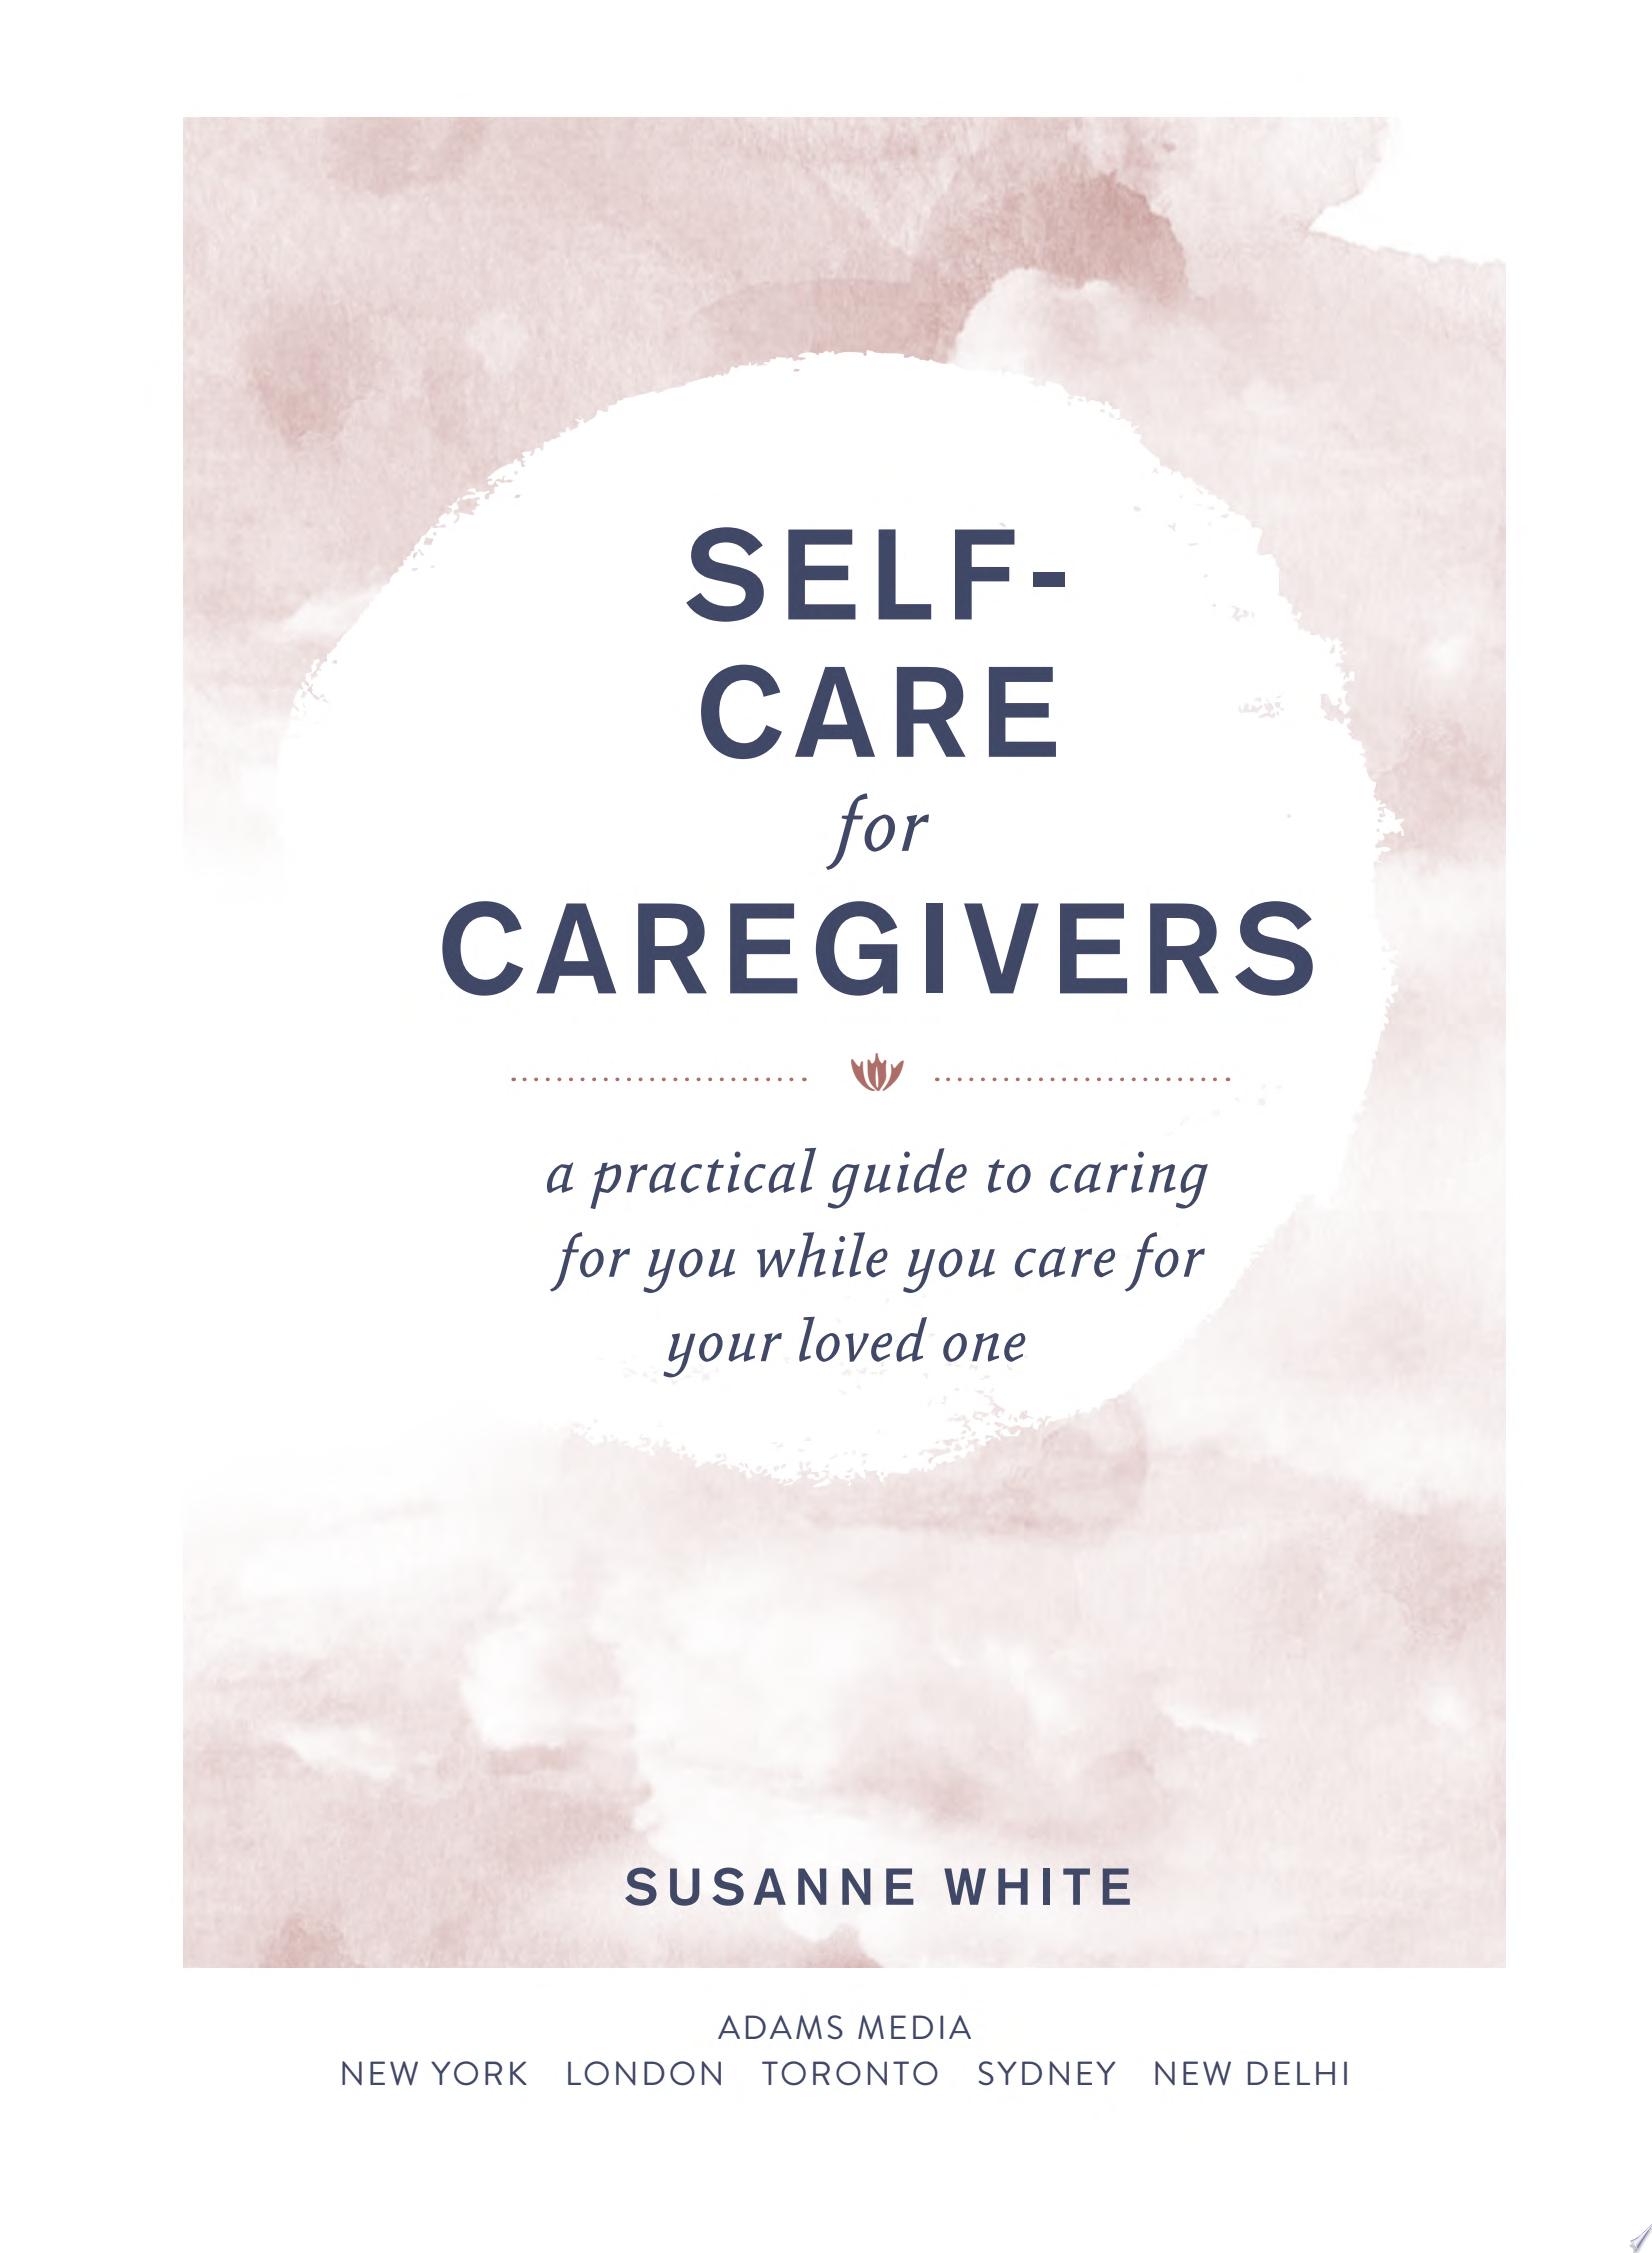 Image for "Self-Care for Caregivers"